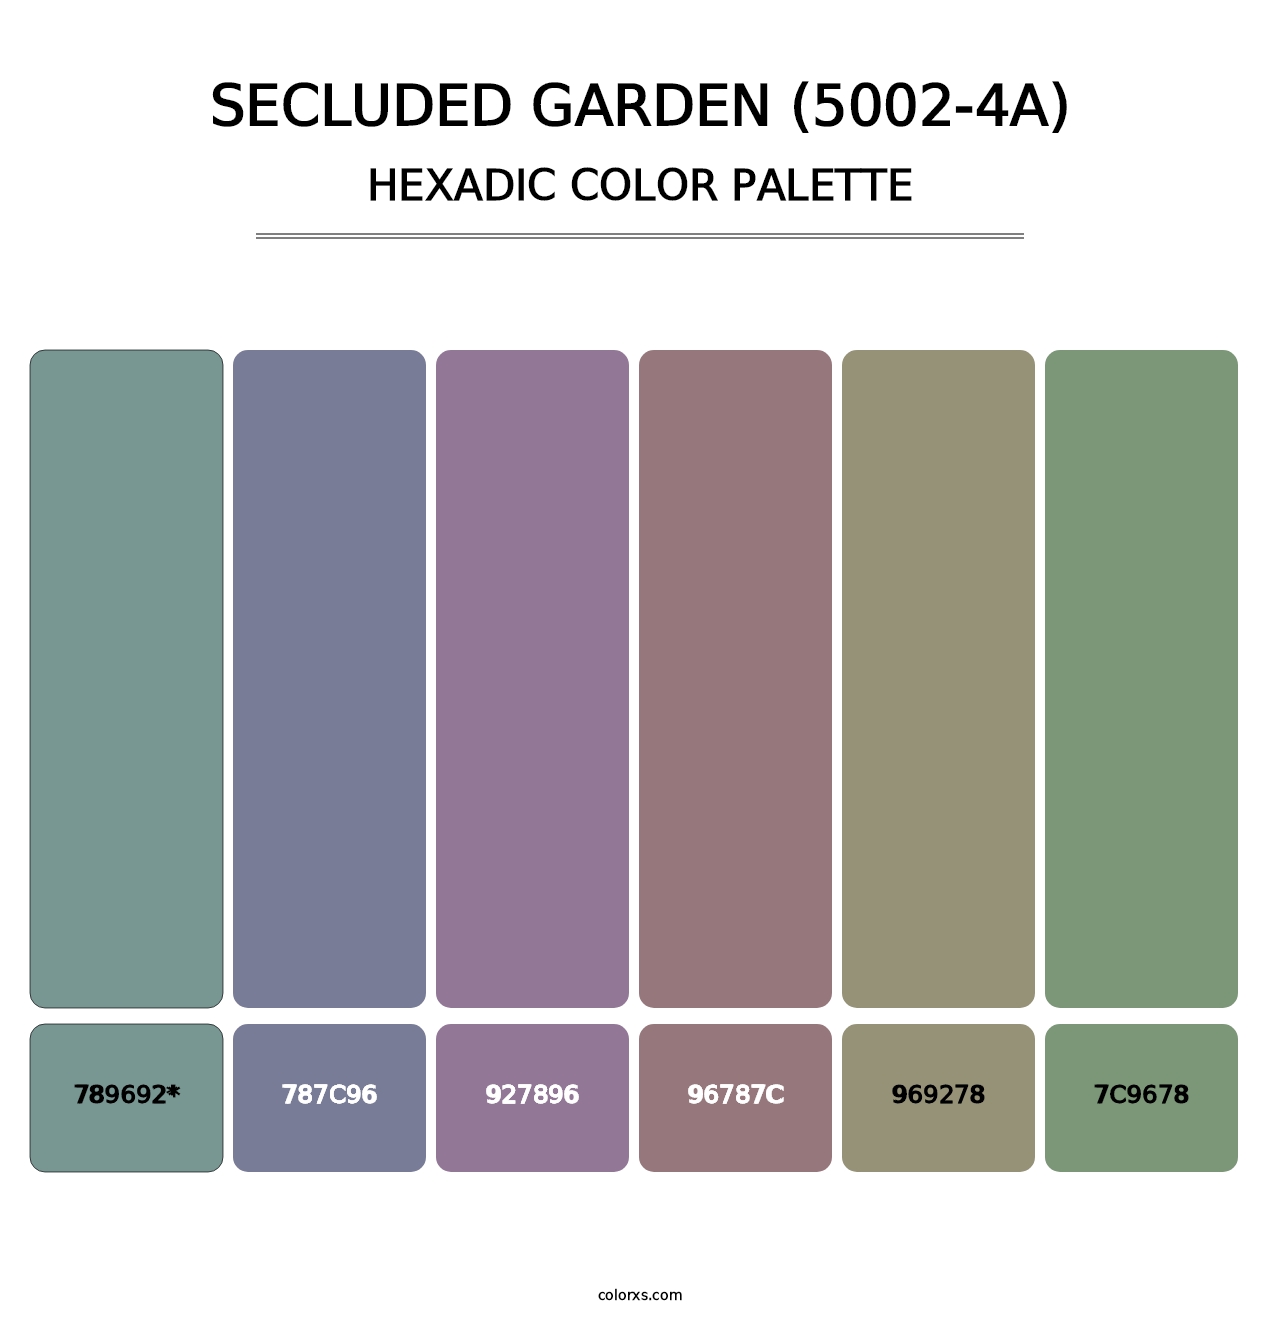 Secluded Garden (5002-4A) - Hexadic Color Palette